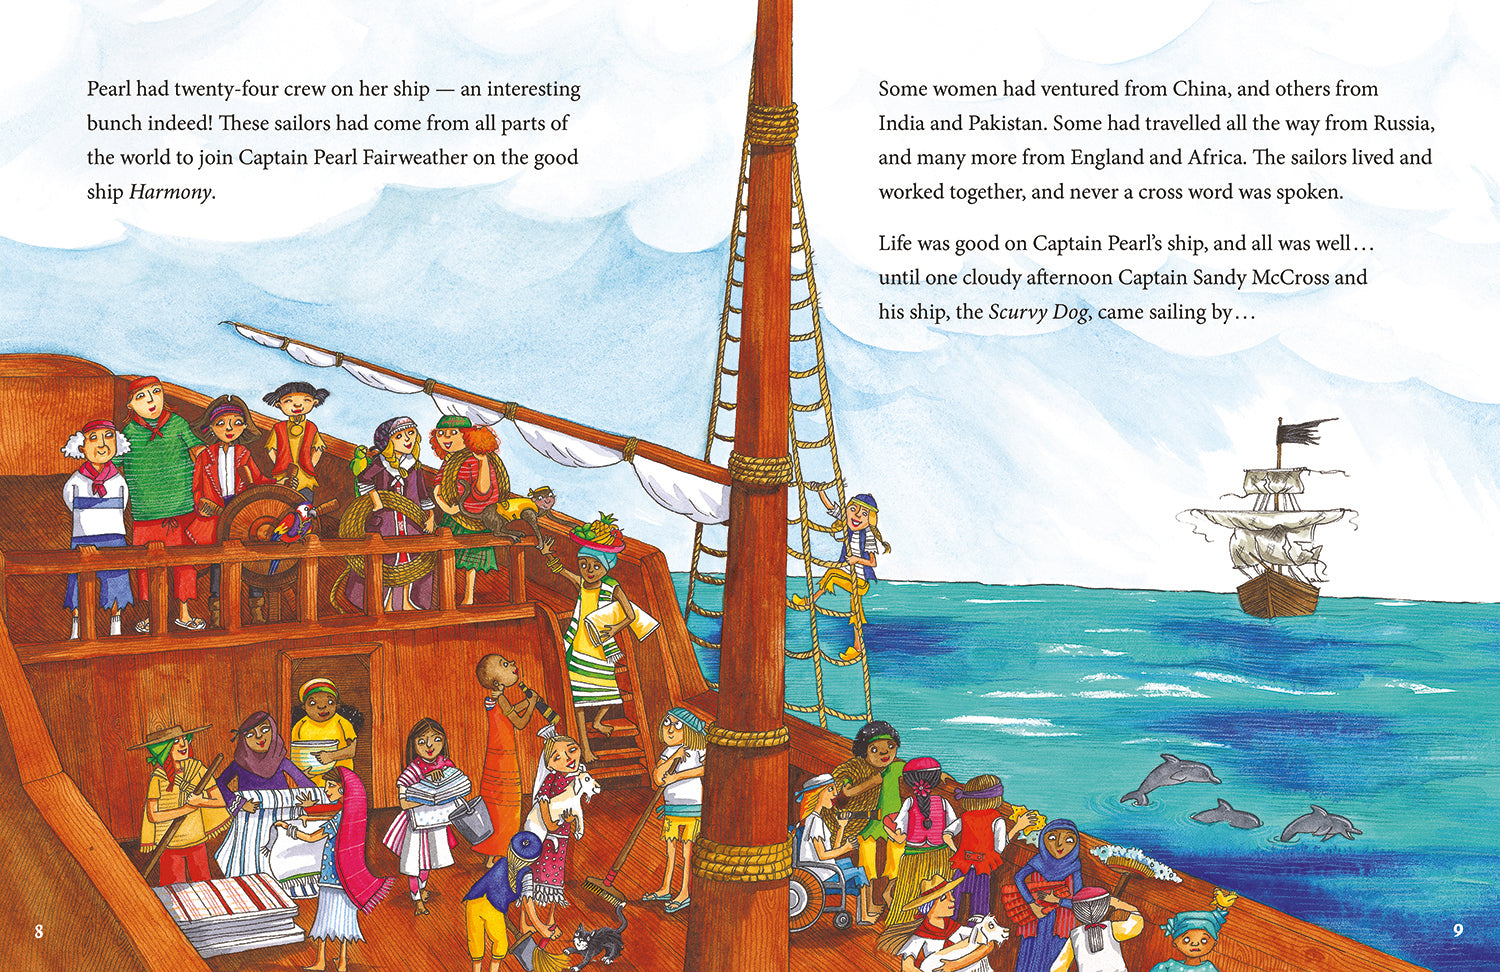 A page from the book 'Pearl Fairweather Pirate Captain' by Jayneen Sanders